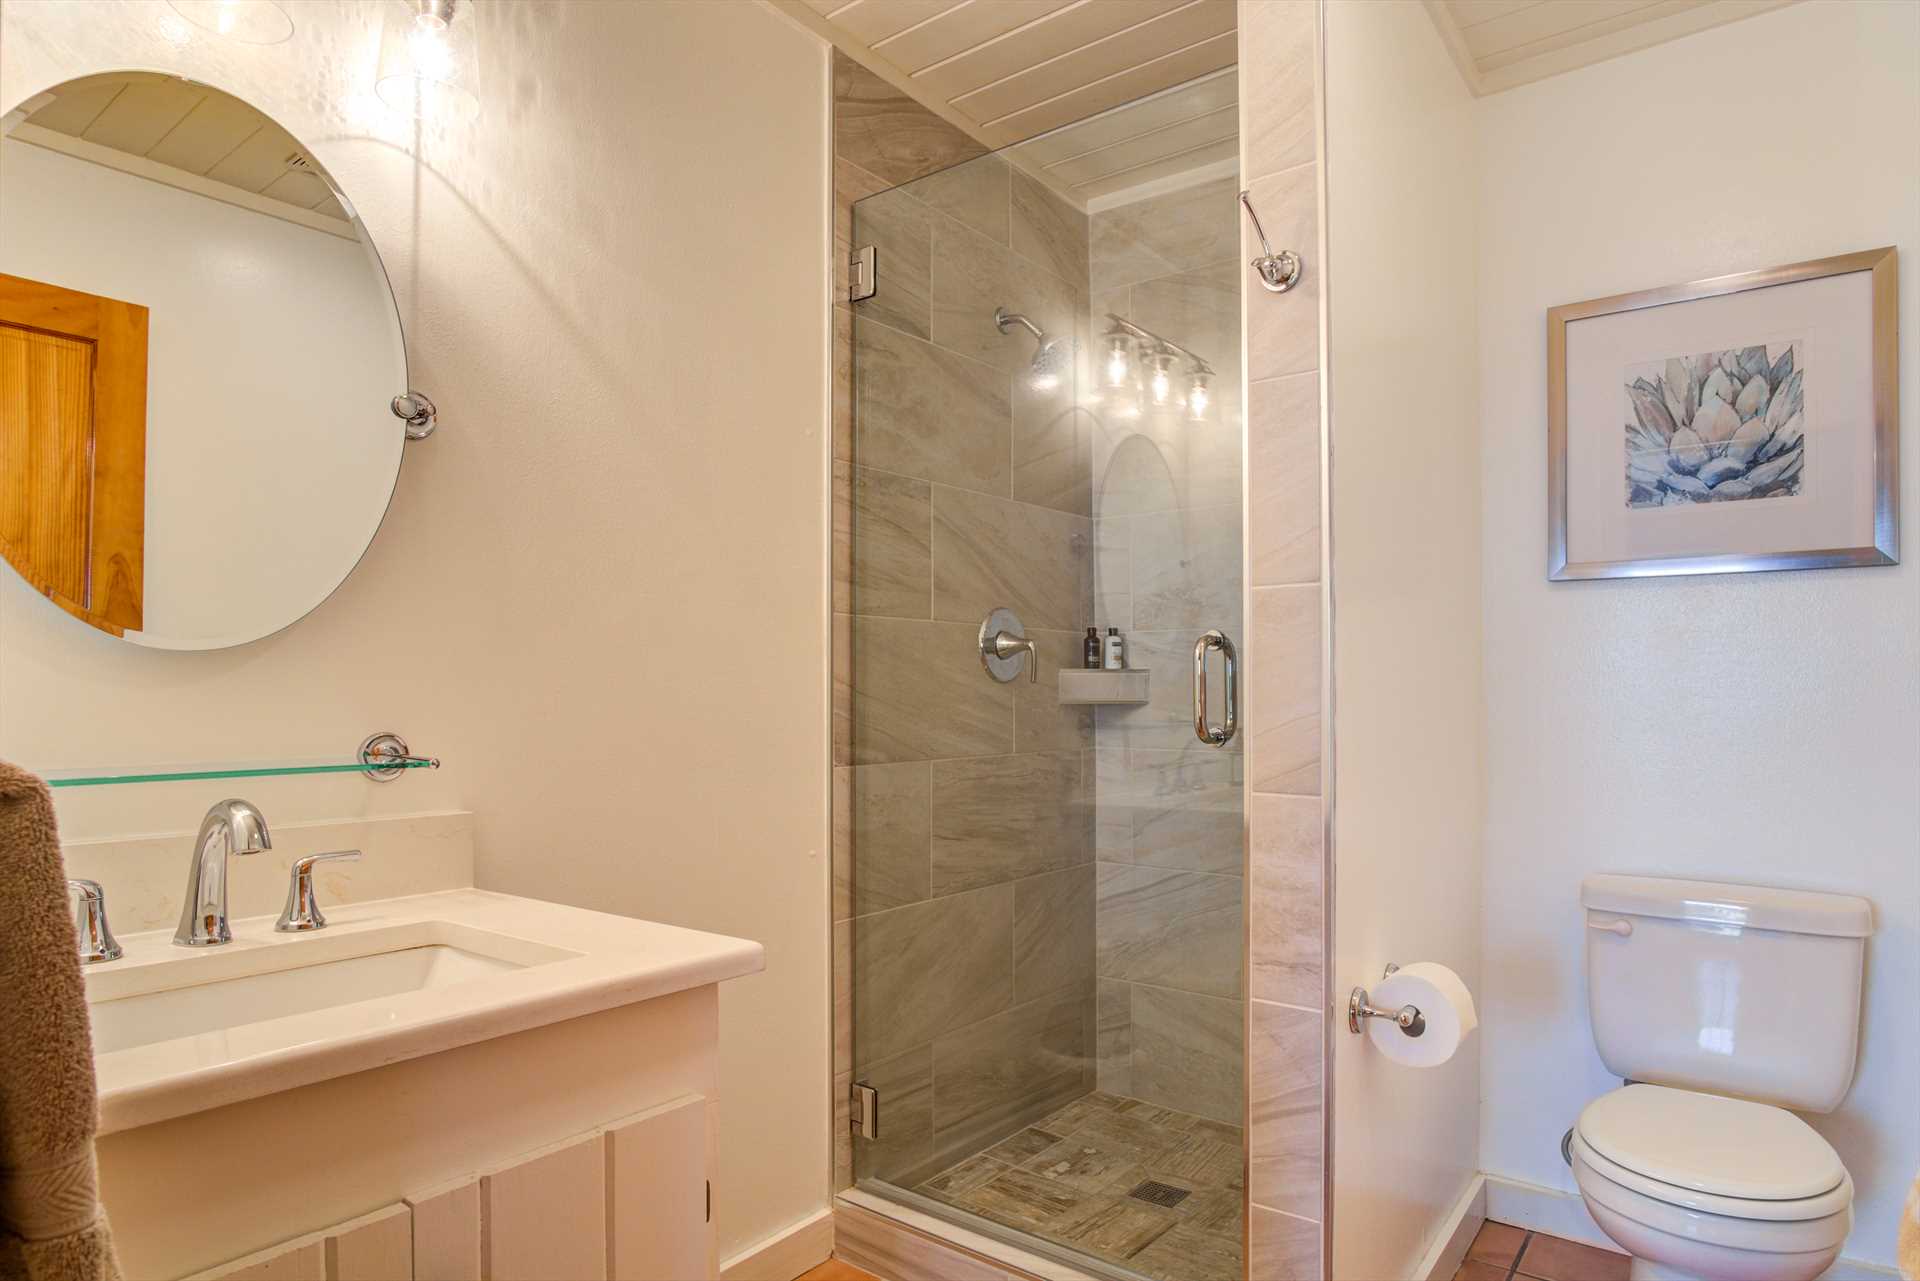                                                 The spotless full bath in the house here includes a glass-door shower stall and clean linens.